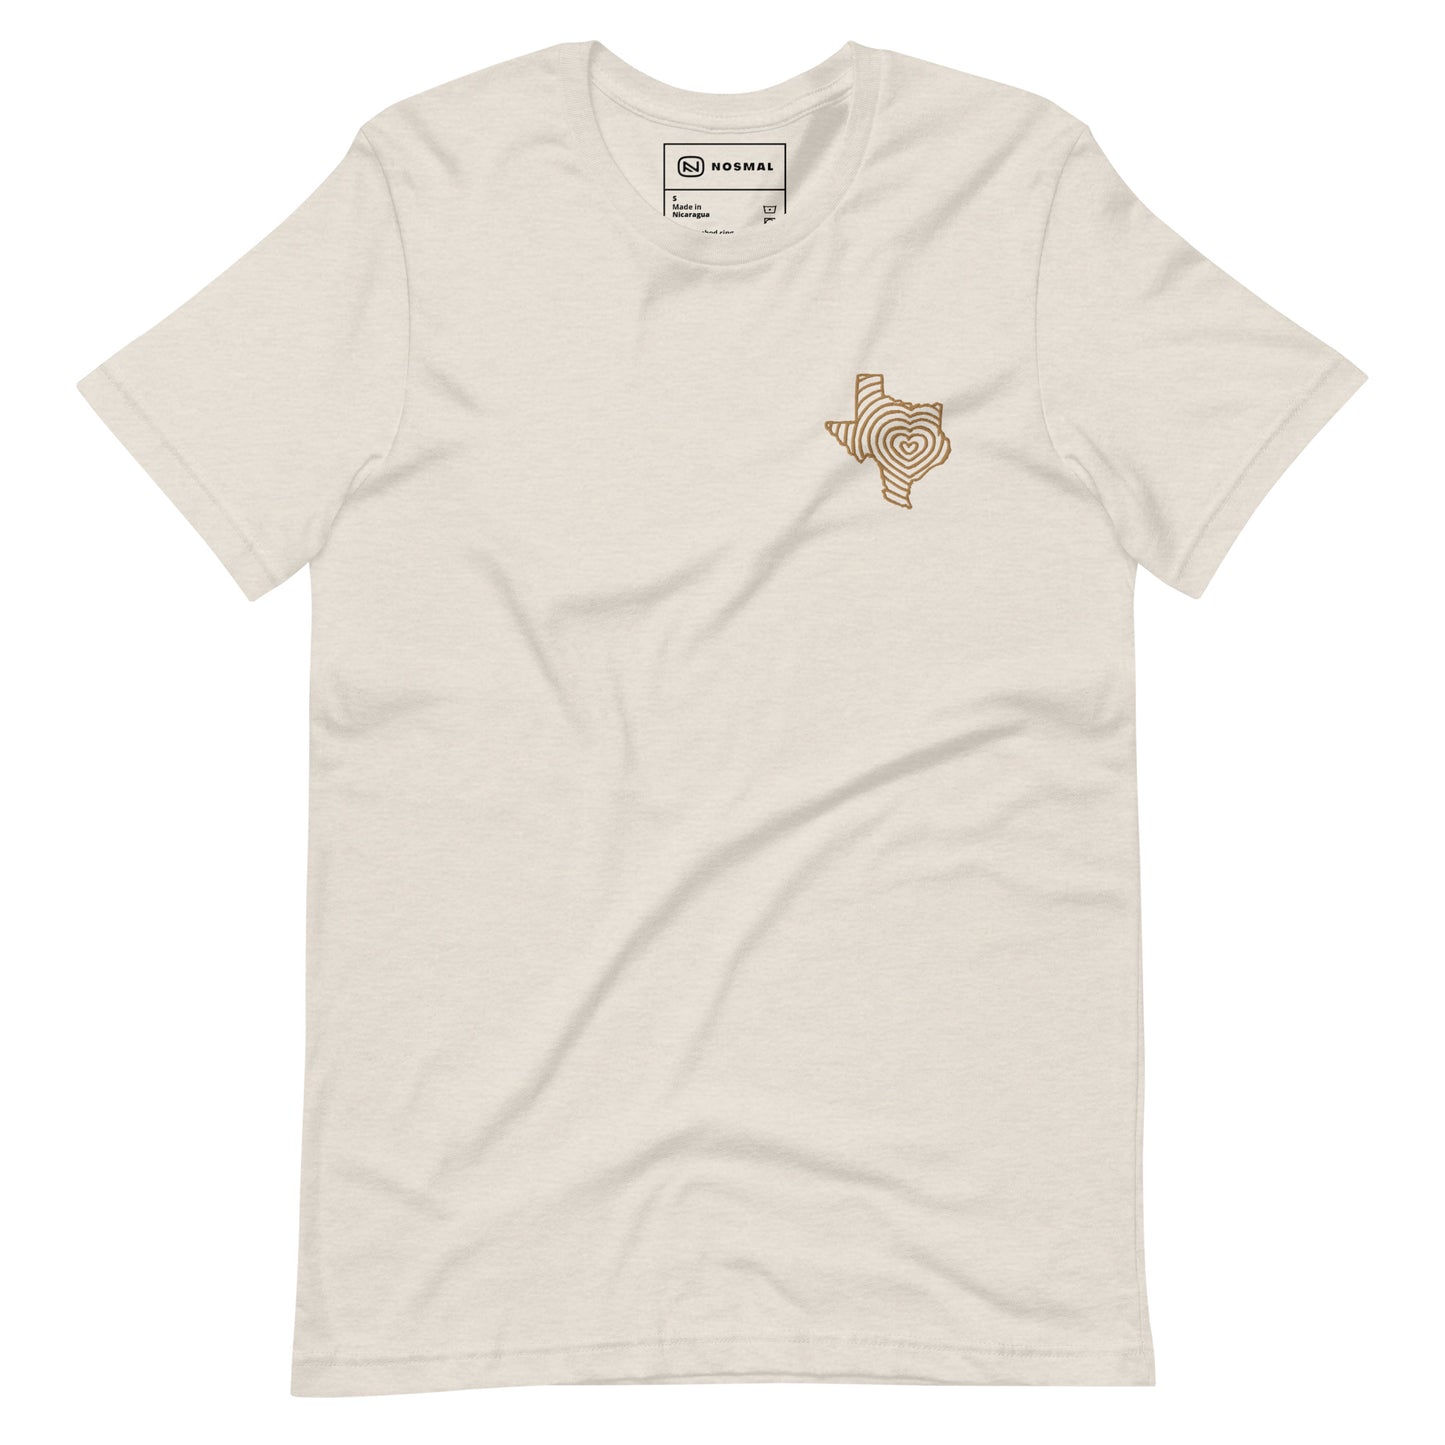 Straight on view of heartbeat of texas gold embroidered design on heather dust unisex t-shirt.